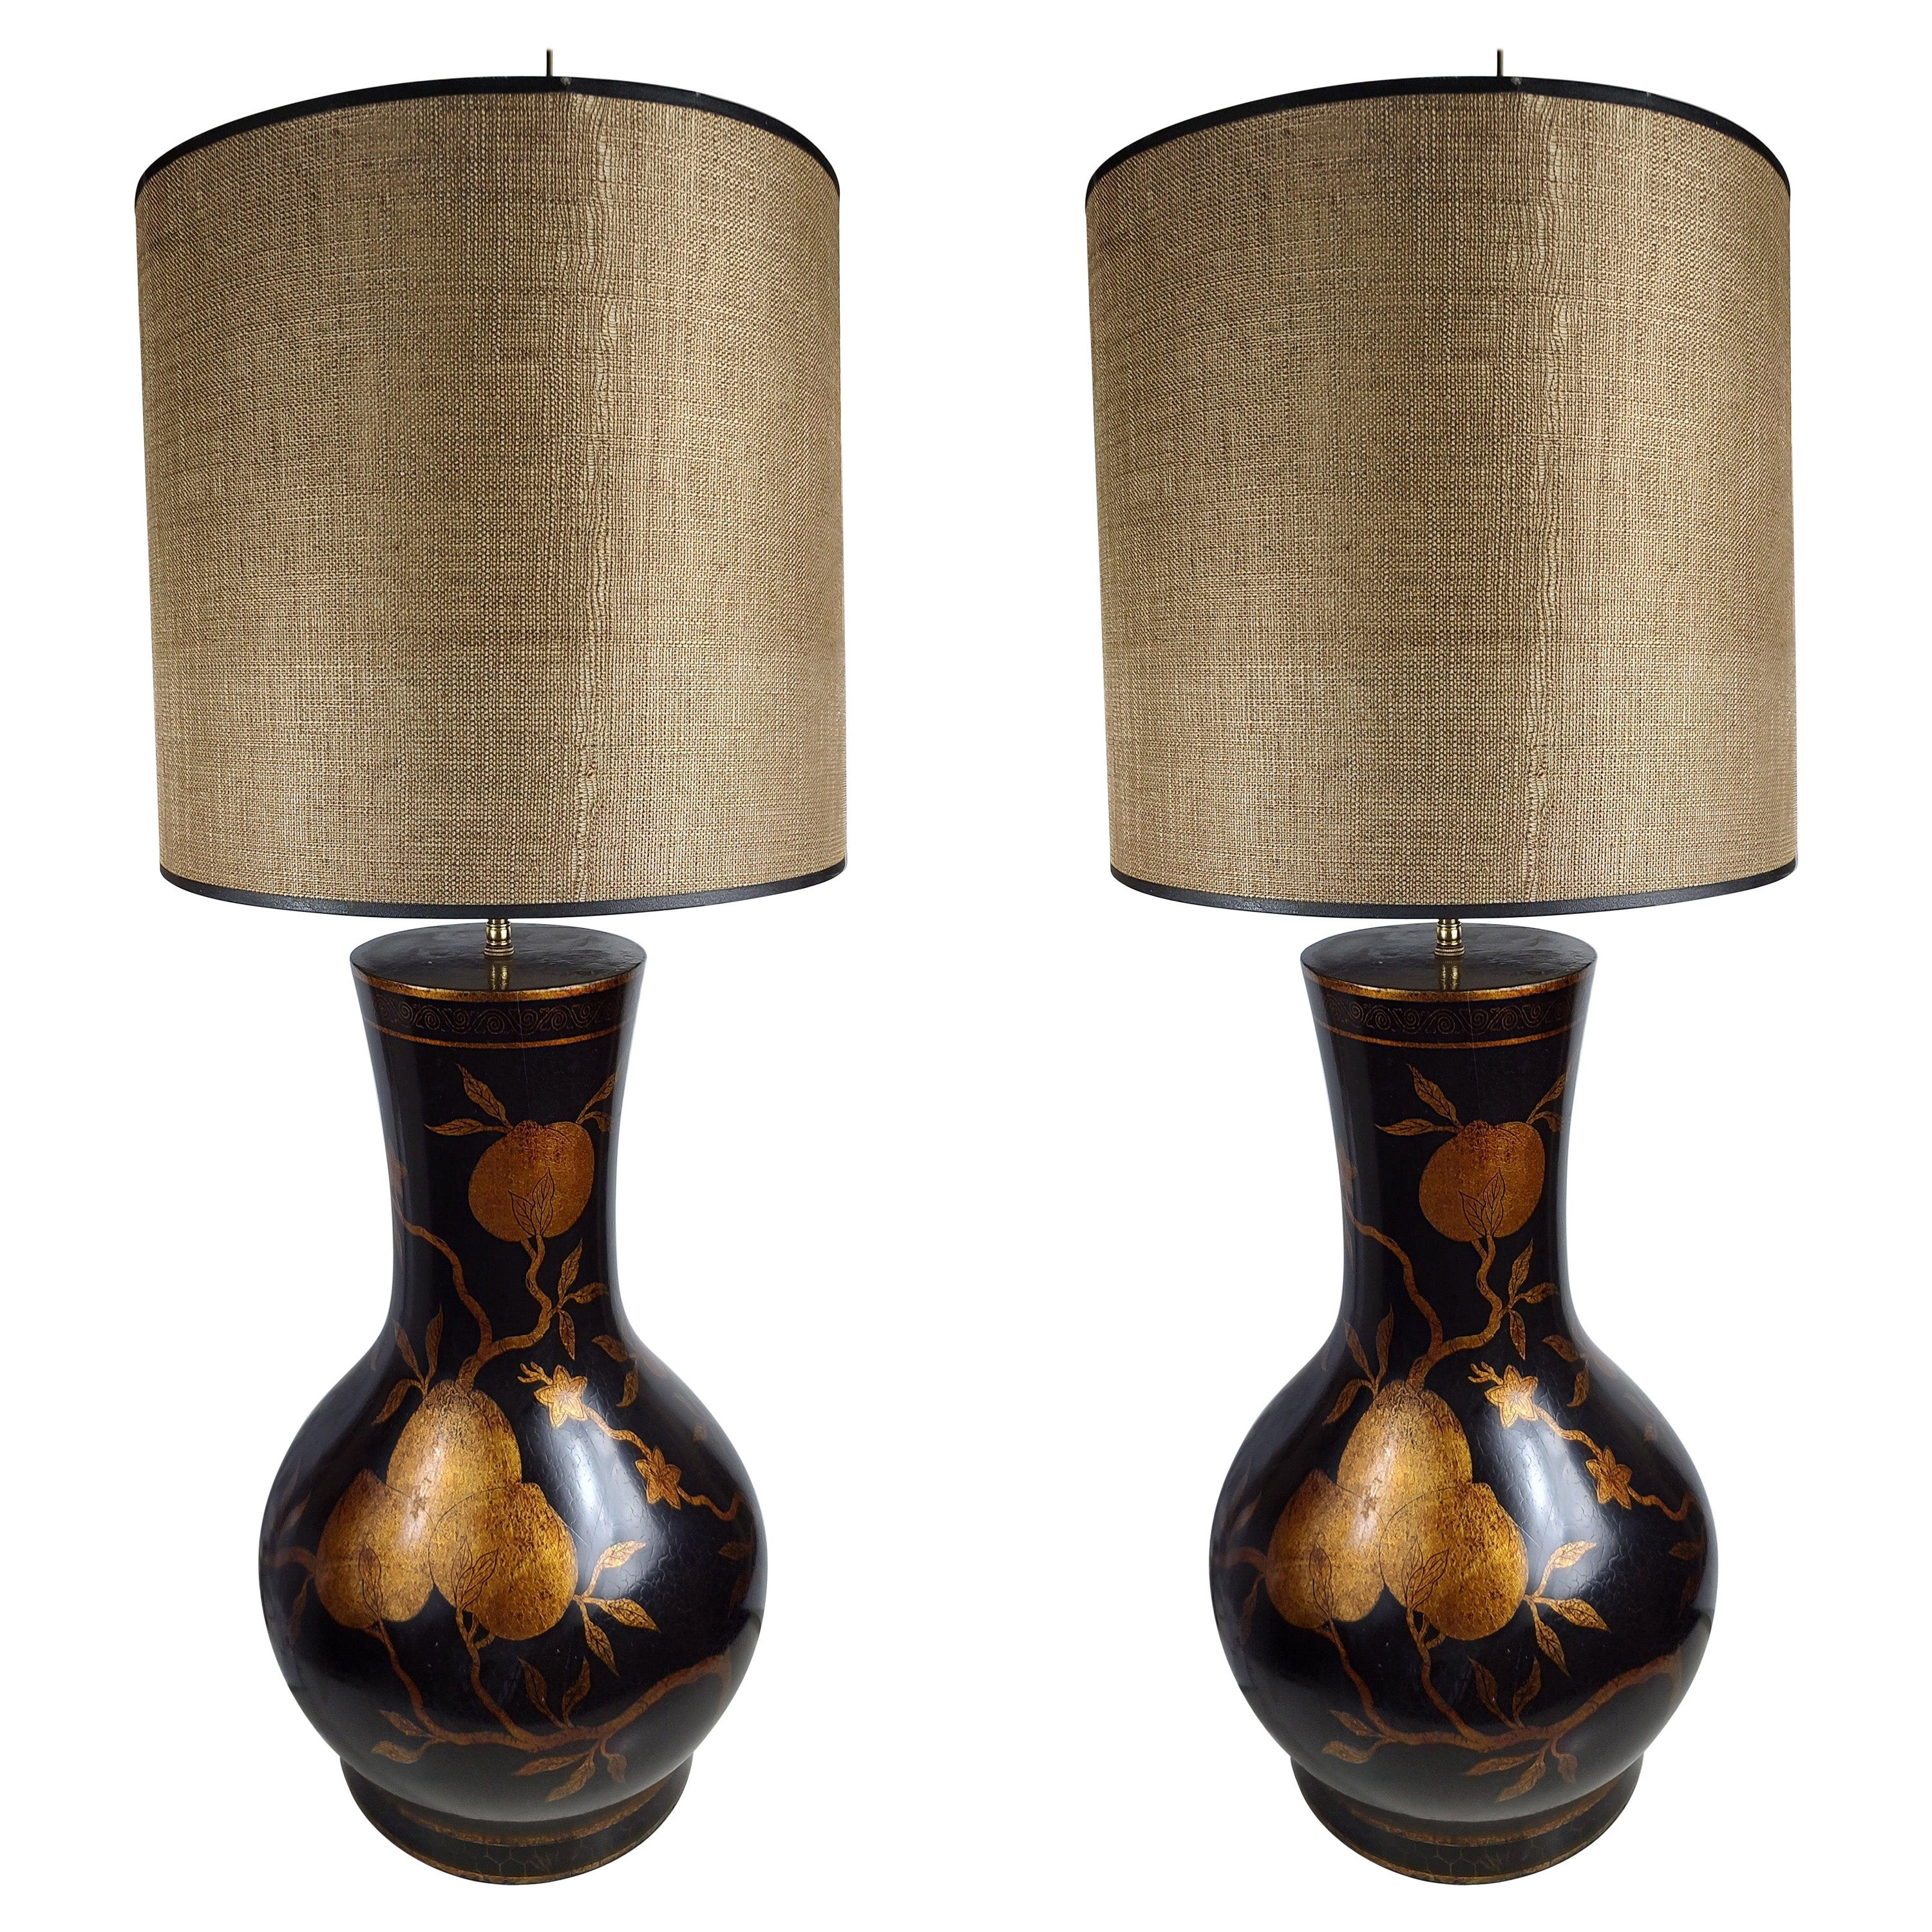 Pair of Monumental Hollywood Regency Table Lamps w Gilt Leaves in a Gourd Form